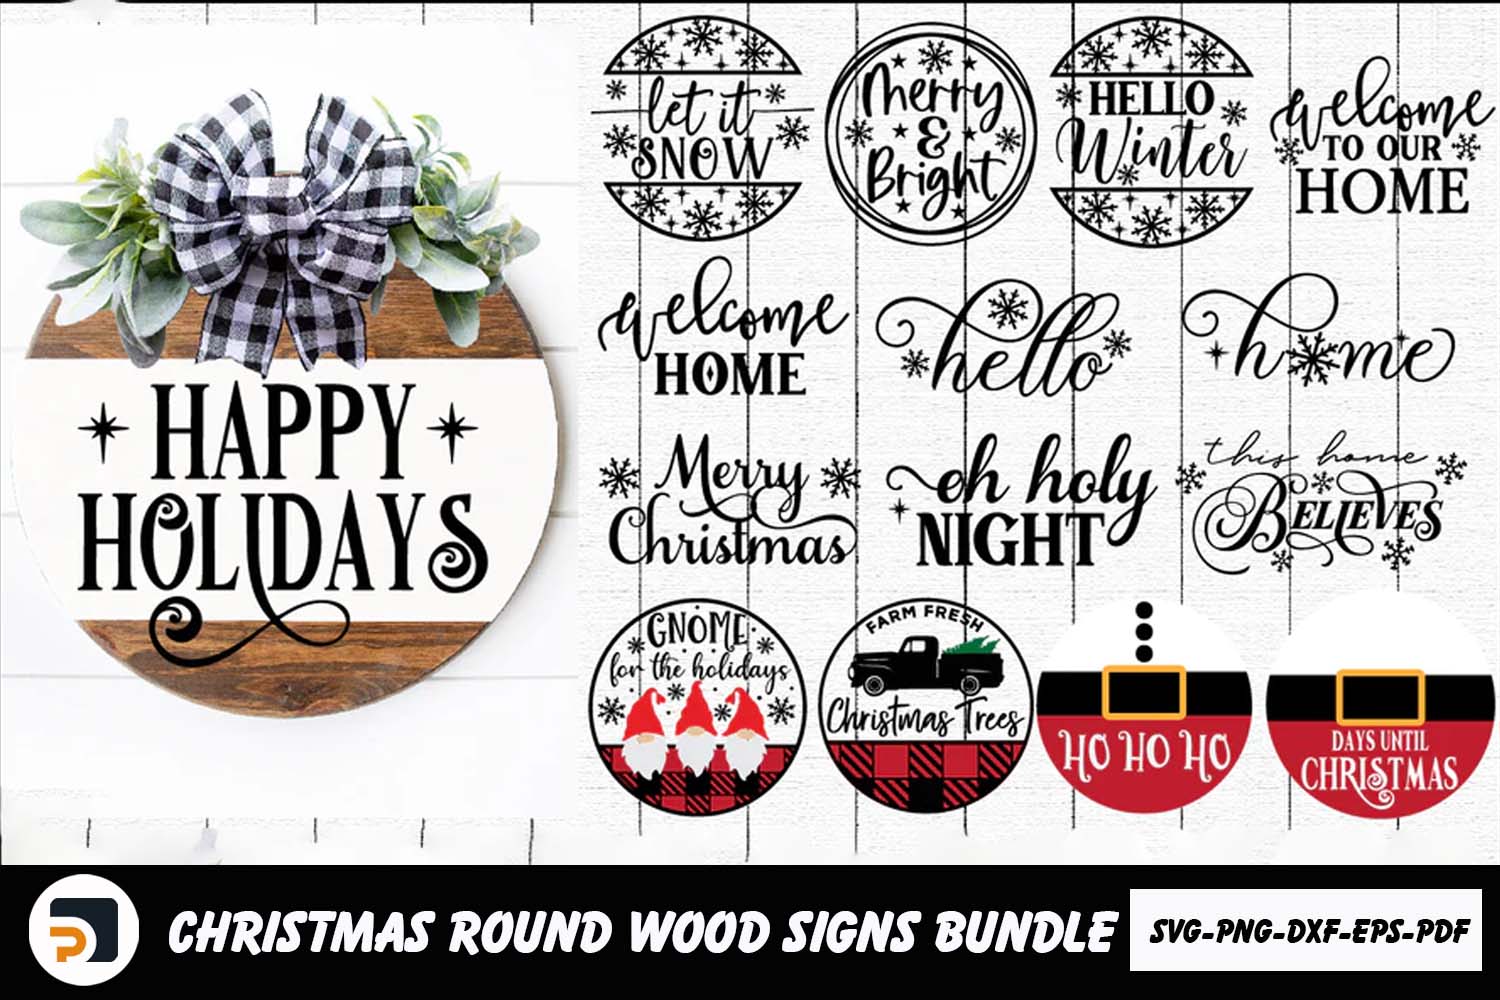 Christmas Round Wood Signs Bundle SVG PNG EPS DXF PDF LFAE5Z2C|Christmas Round Wood Signs Bundle SVG PNG EPS DXF PDF